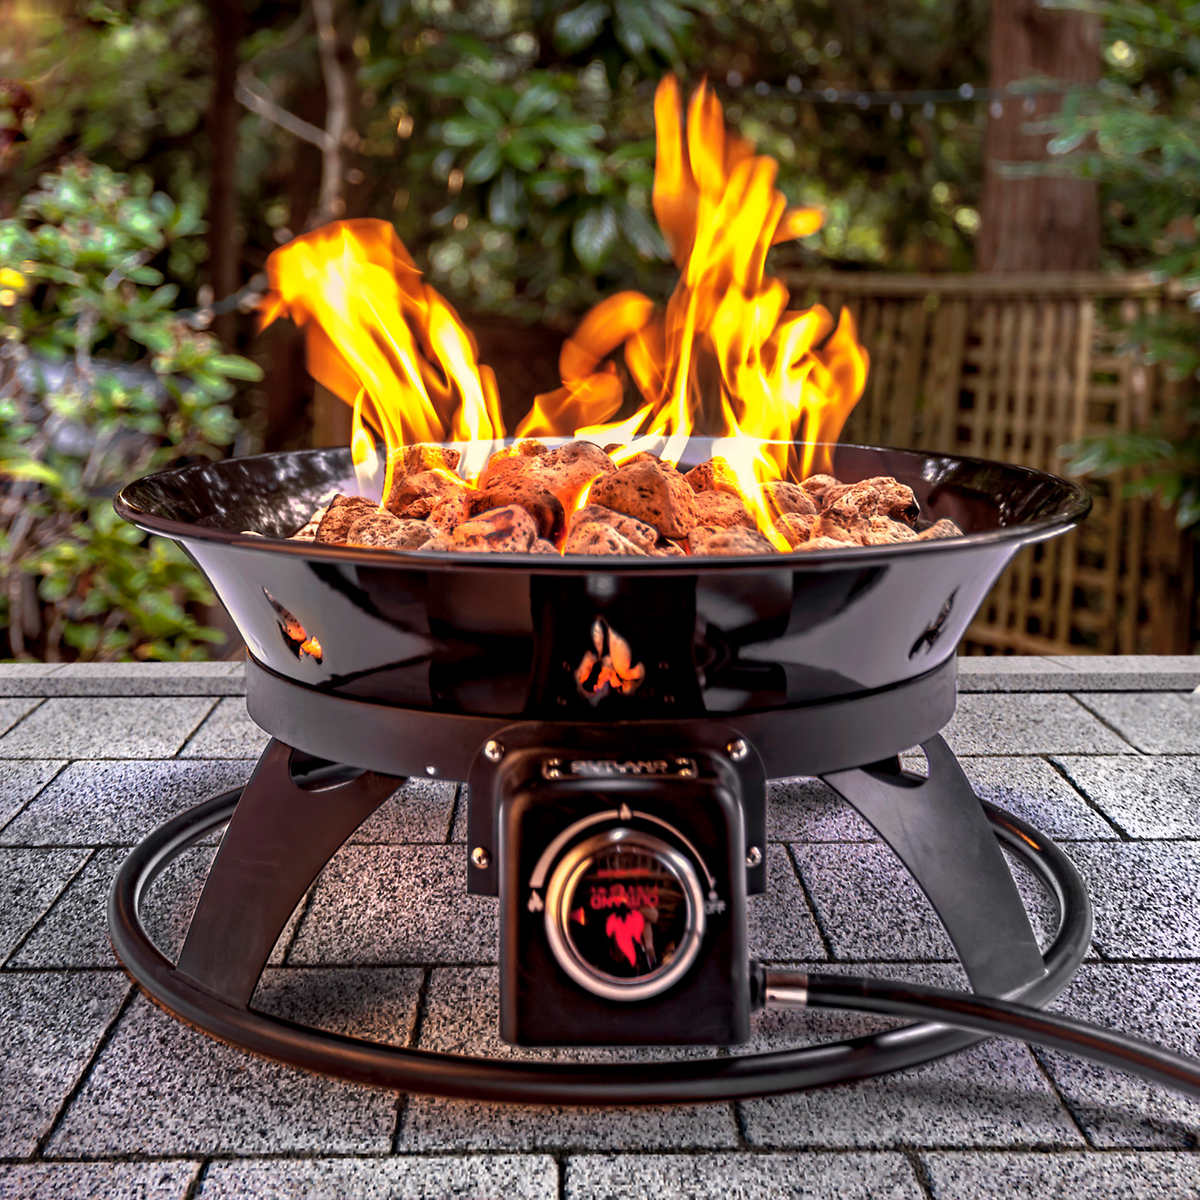 Outland Firebowl Outdoor Firepit Costco, How To Make An Outdoor Propane Fire Pit